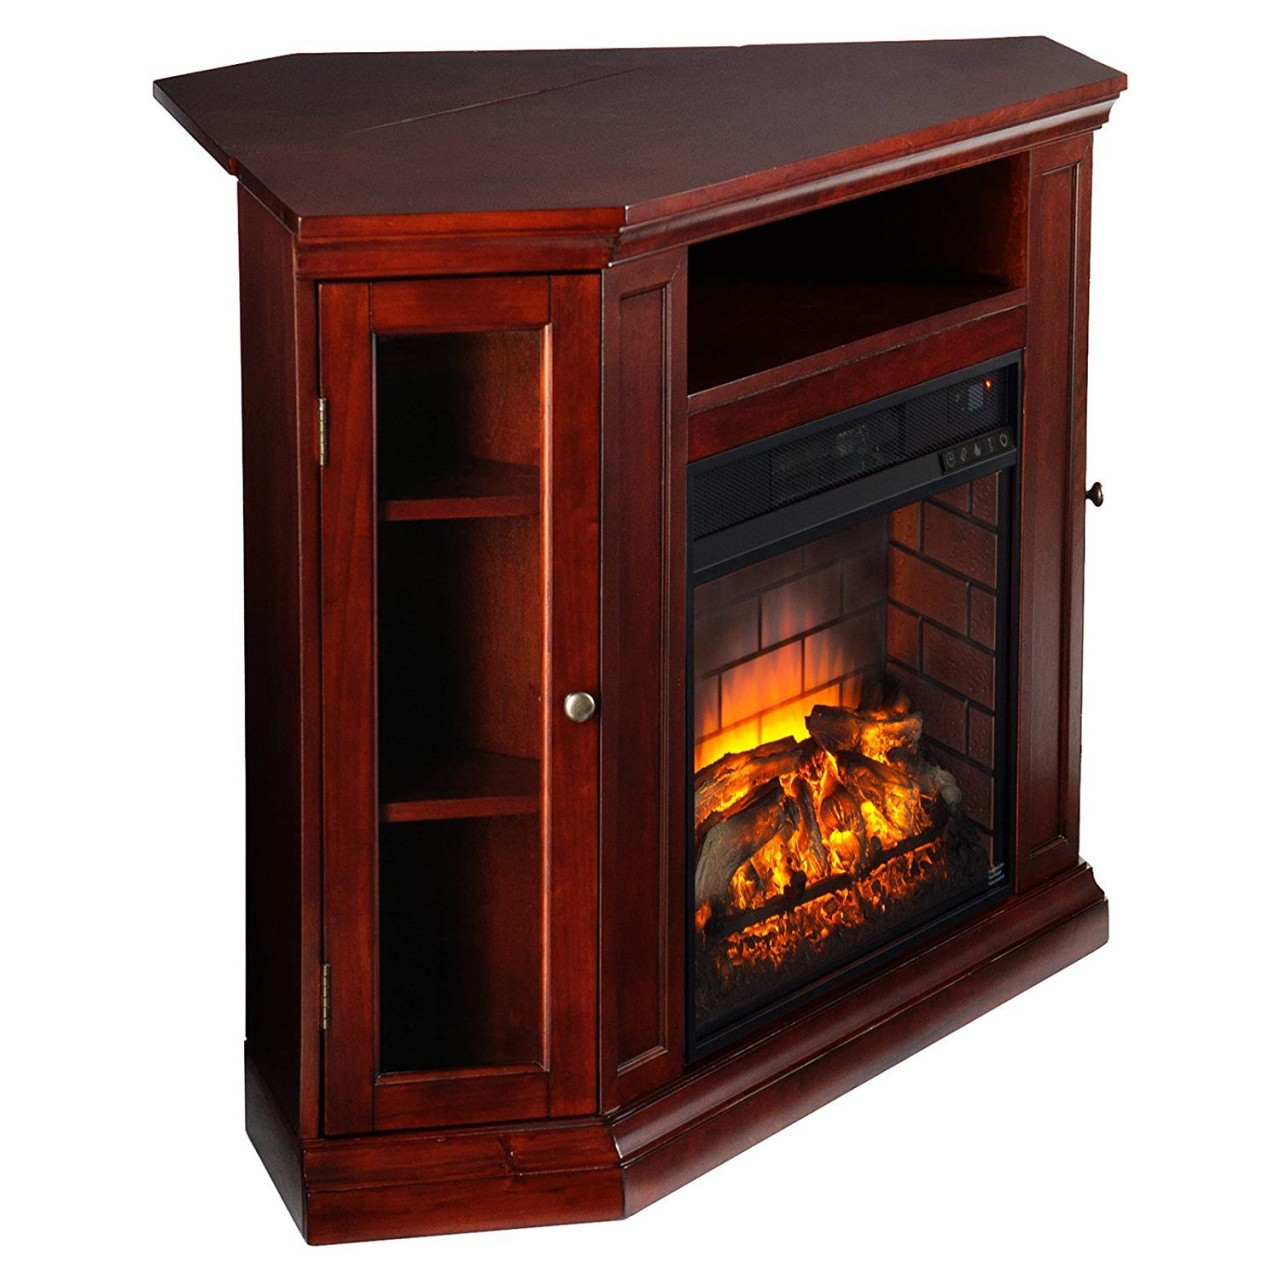 Ember Hearth Electric Media Fireplace
 What is A Gel Fuel Fireplace – FIREPLACE IDEAS